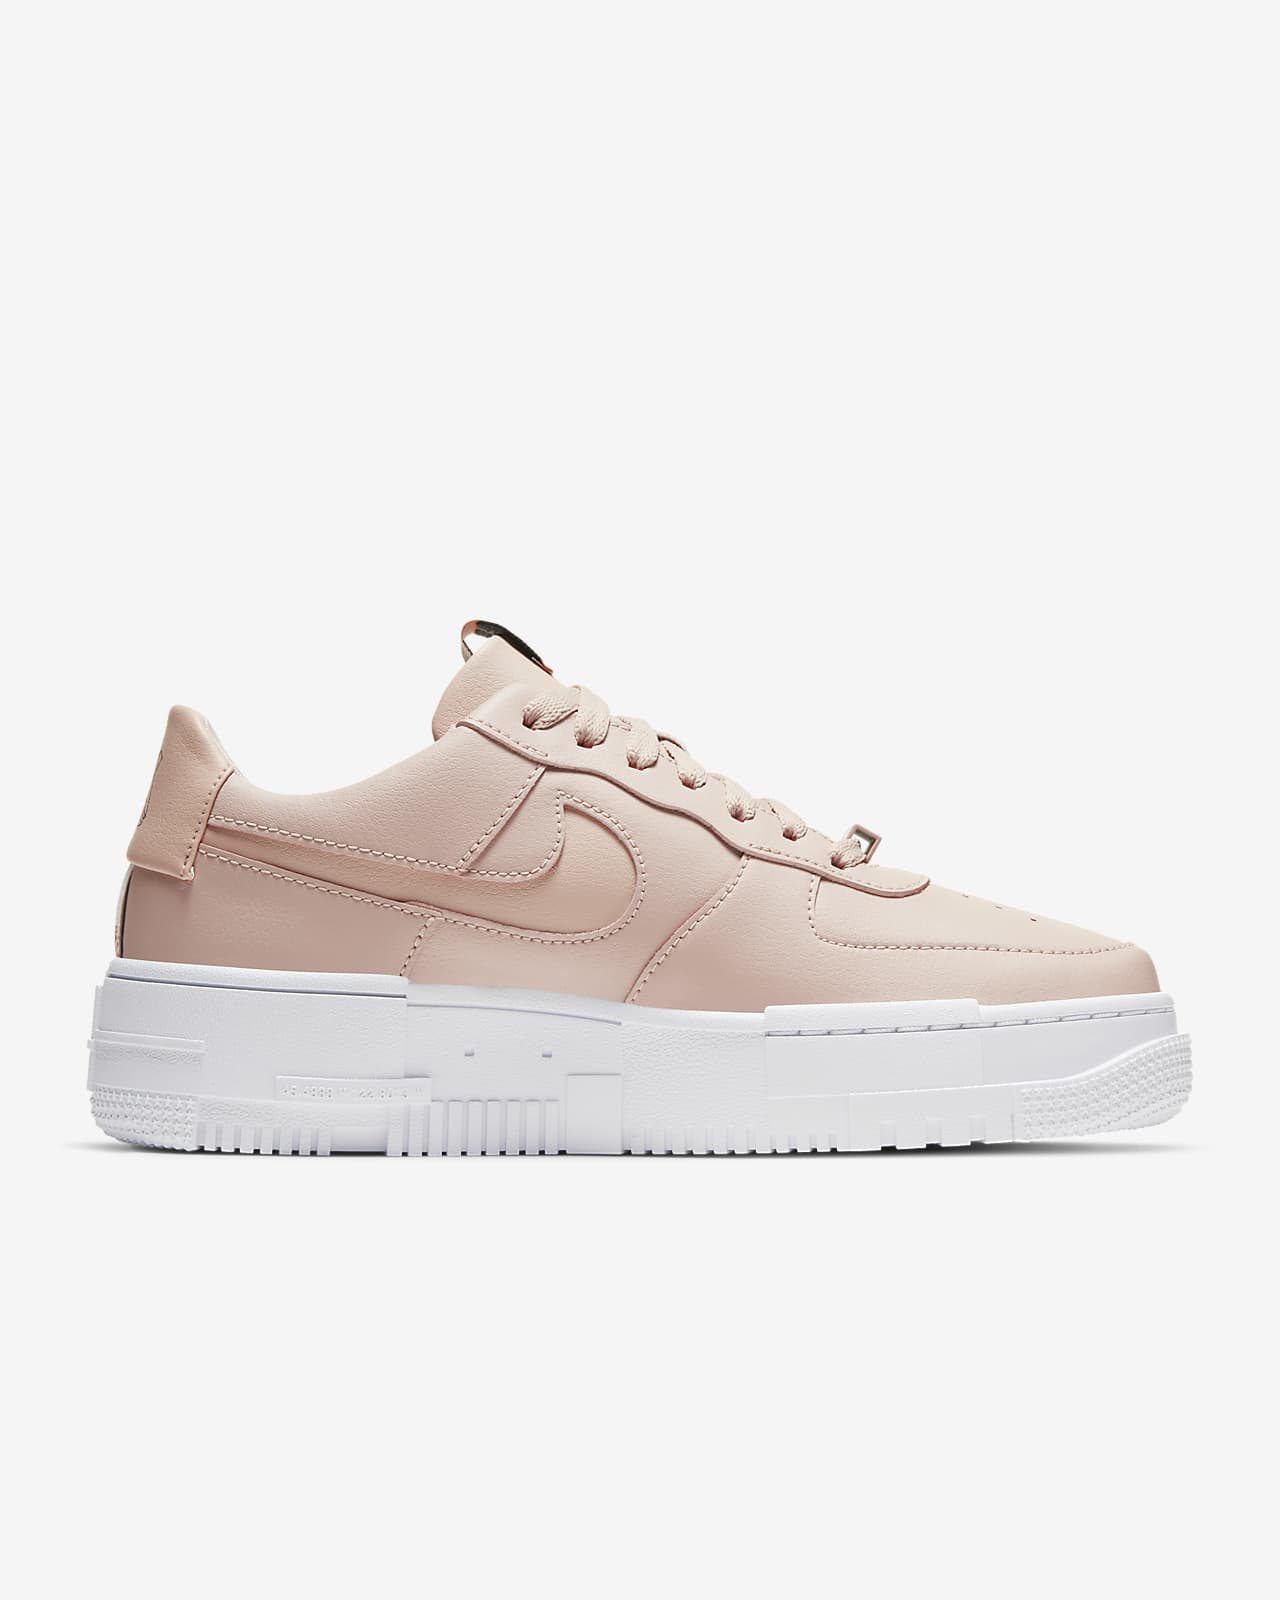 nike air force 1 shoe size